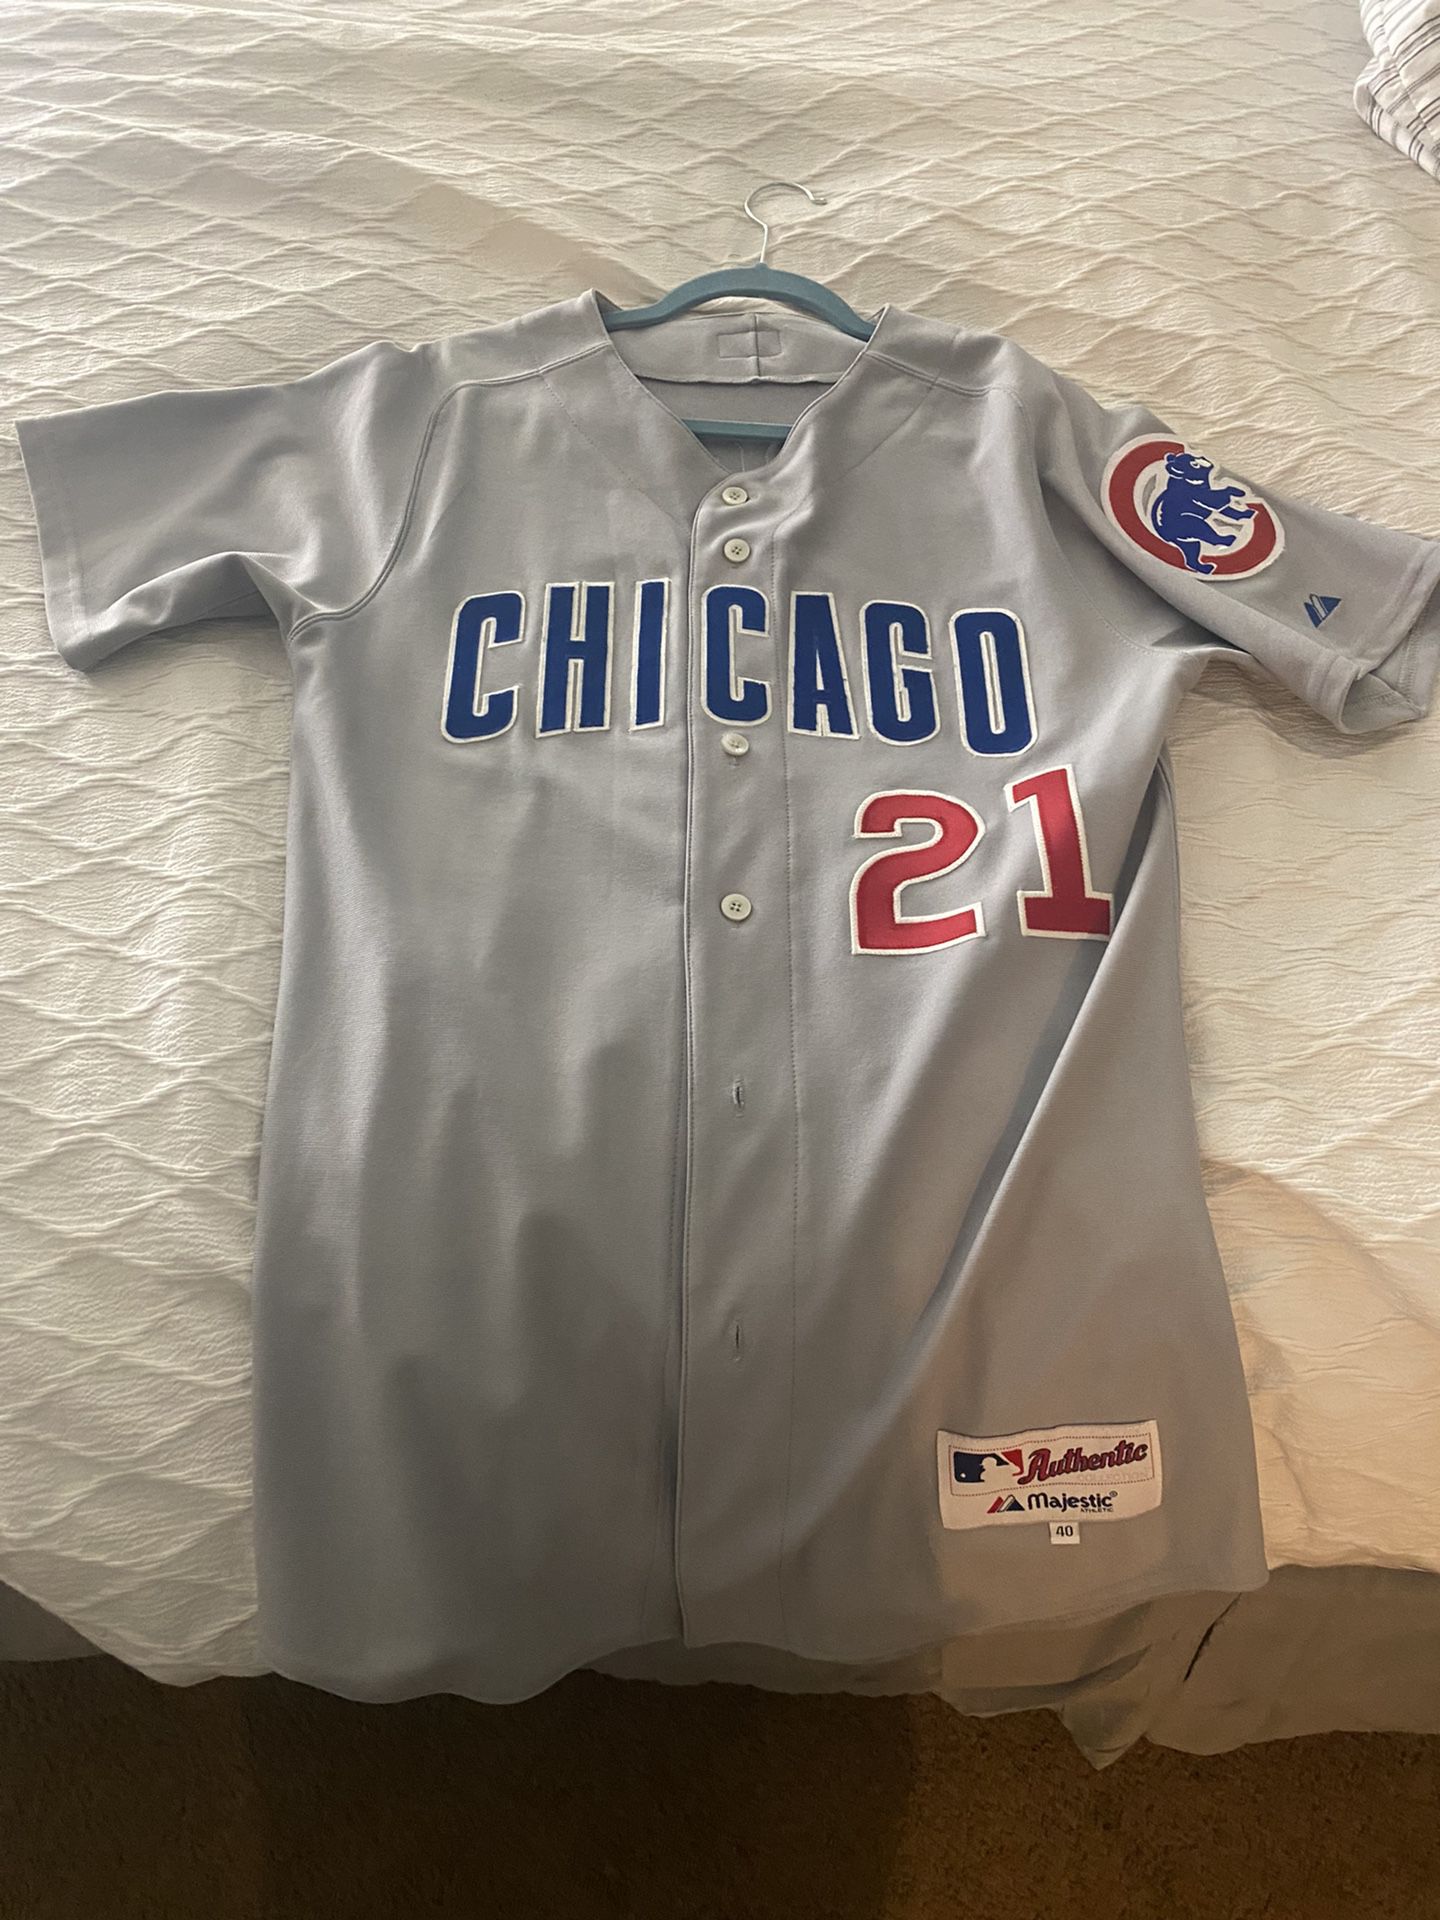 Sammy Sosa Authentic Jersey for Sale in Sacramento, CA - OfferUp